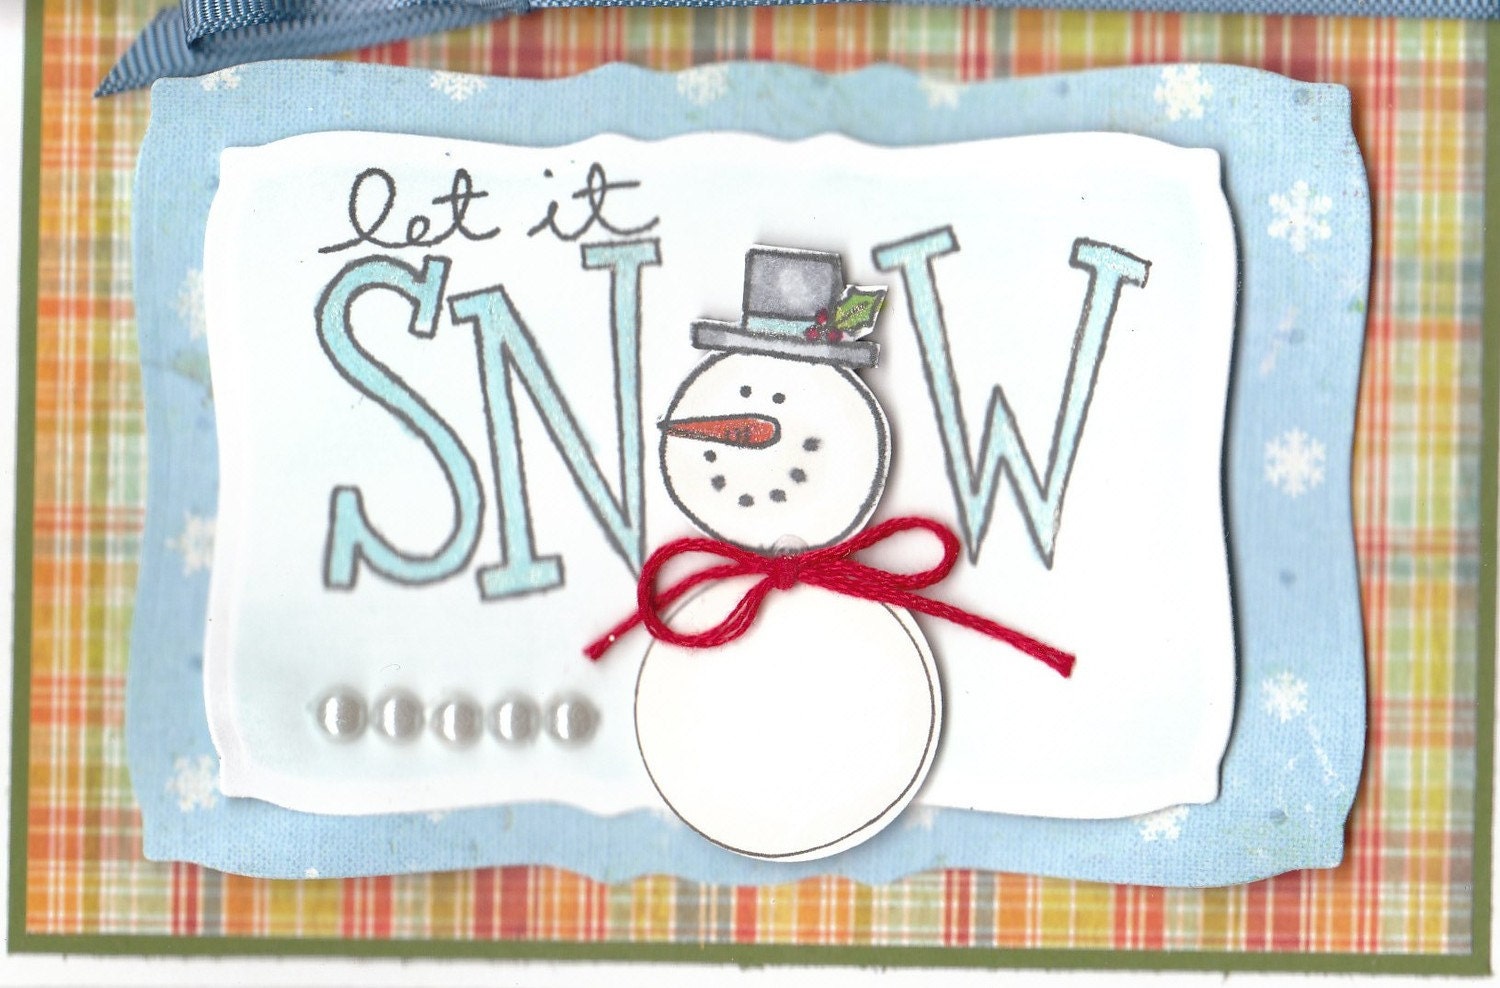 STAMPIN UP LET IT SNOW SNOWMAN MERRY CHRISTMAS HANDMADE CARD